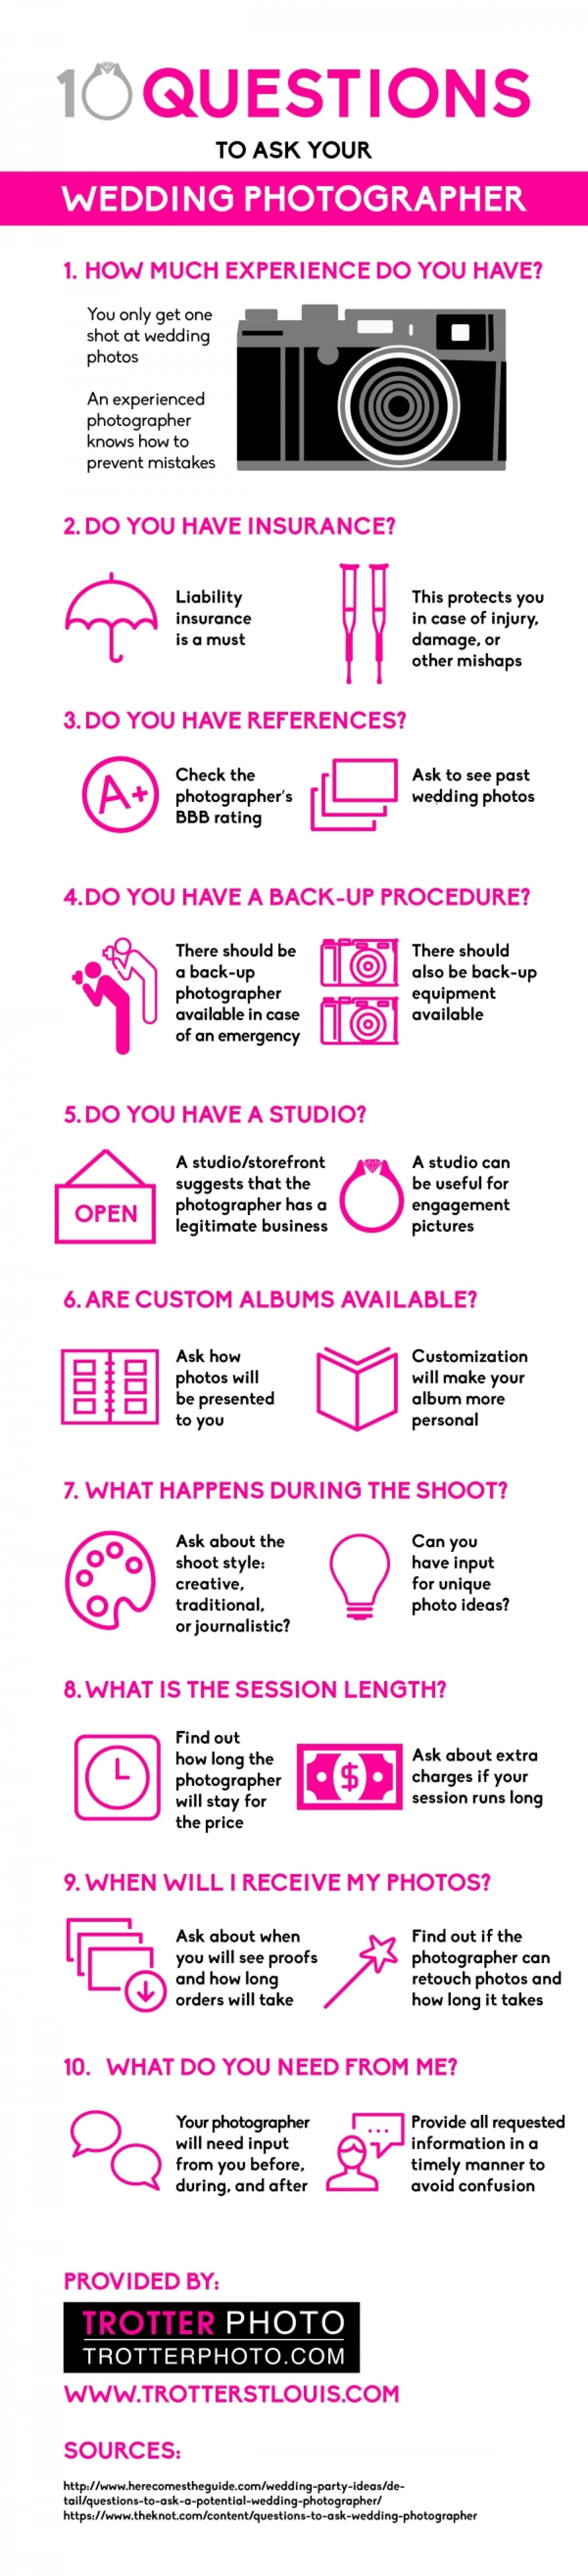 10 Questions To Ask Your Wedding Photographer